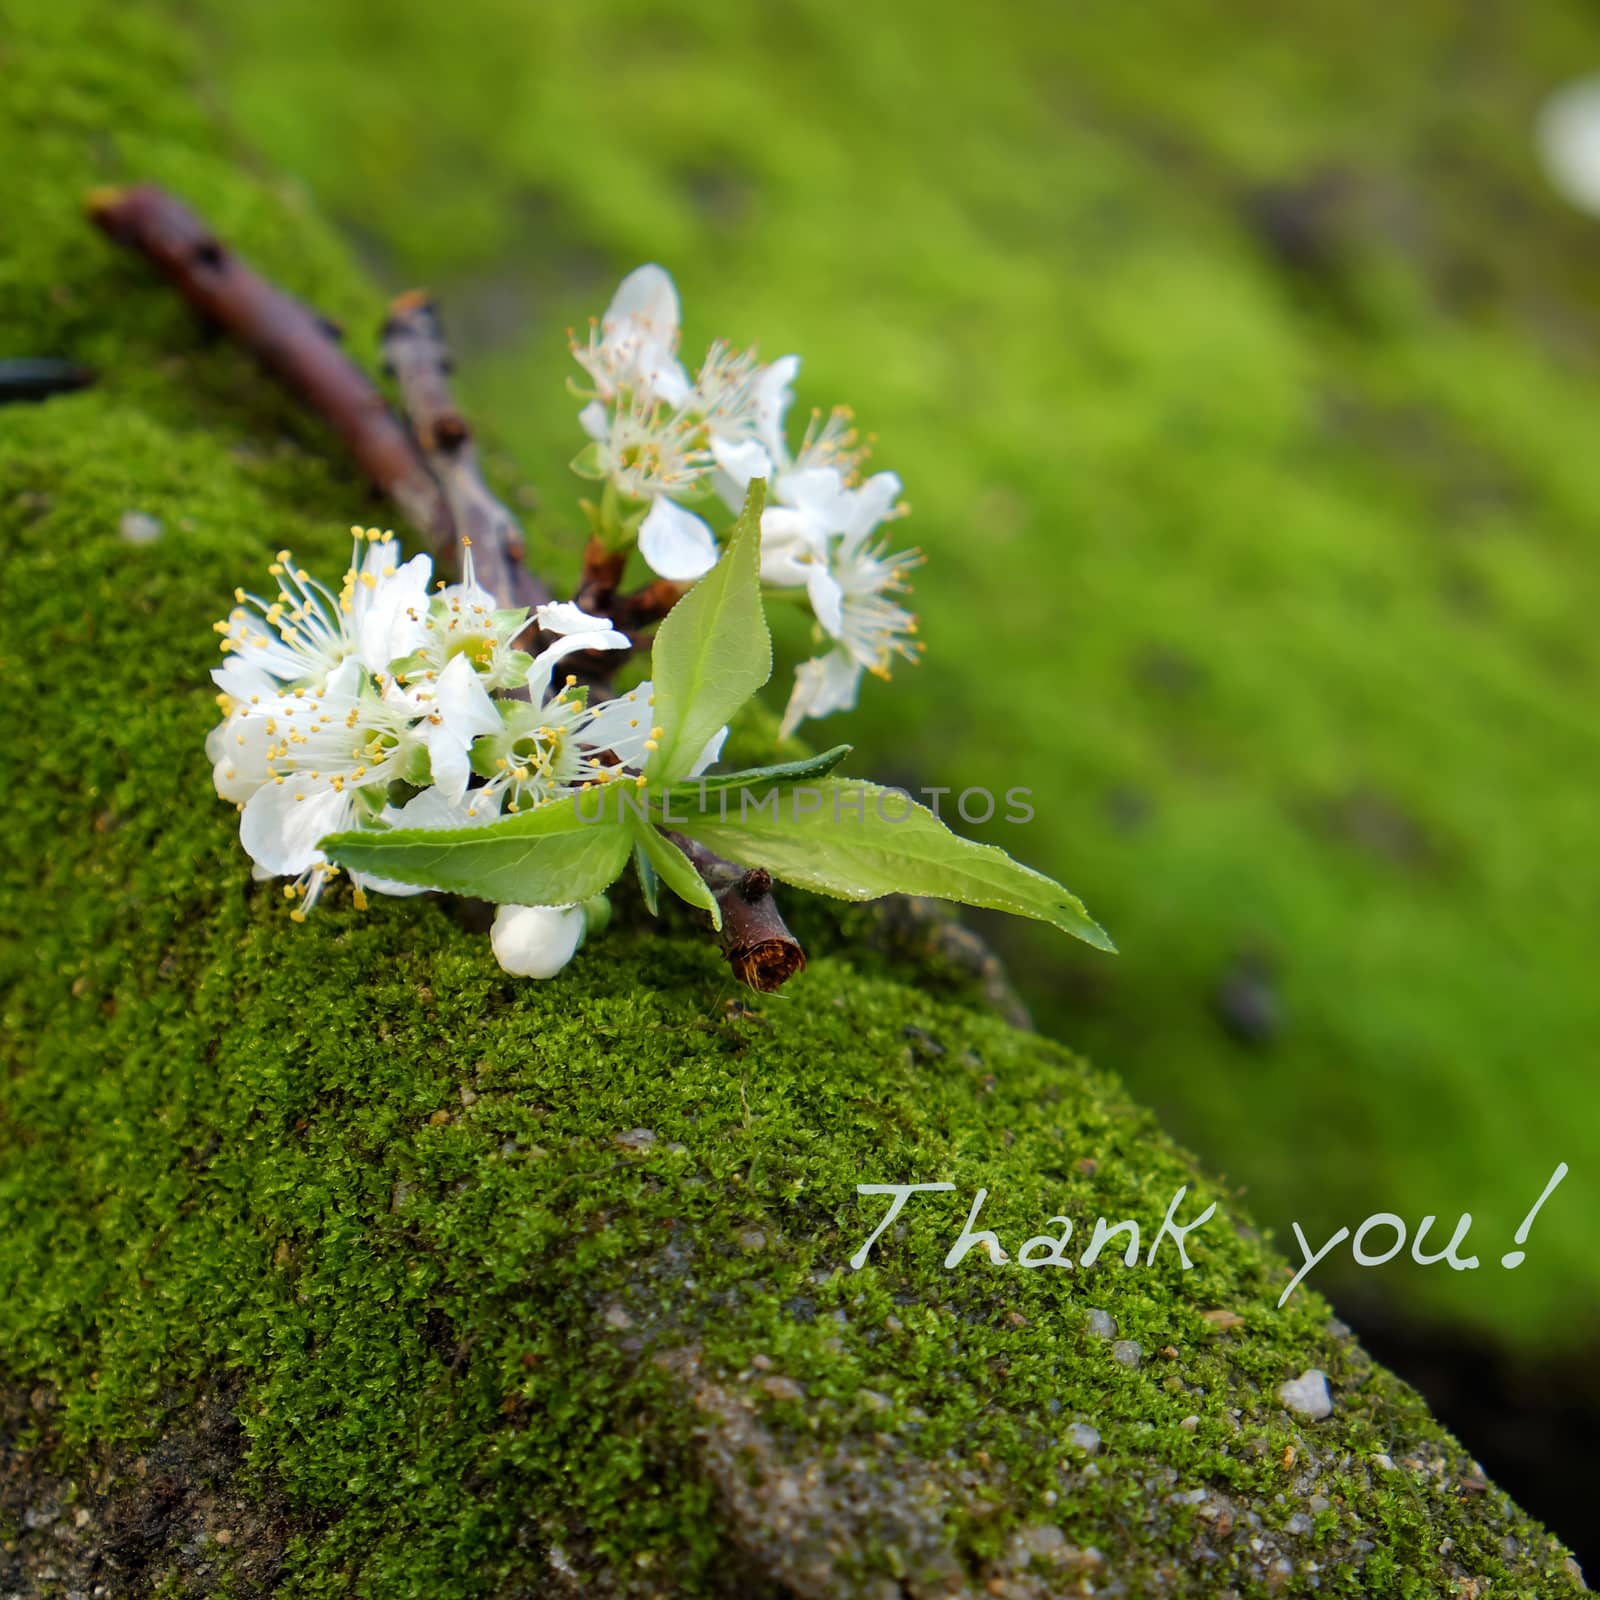 Thank you background on green moss, message for gratitude, beautiful white plum flower on green background with thankyou text for mother day or father day